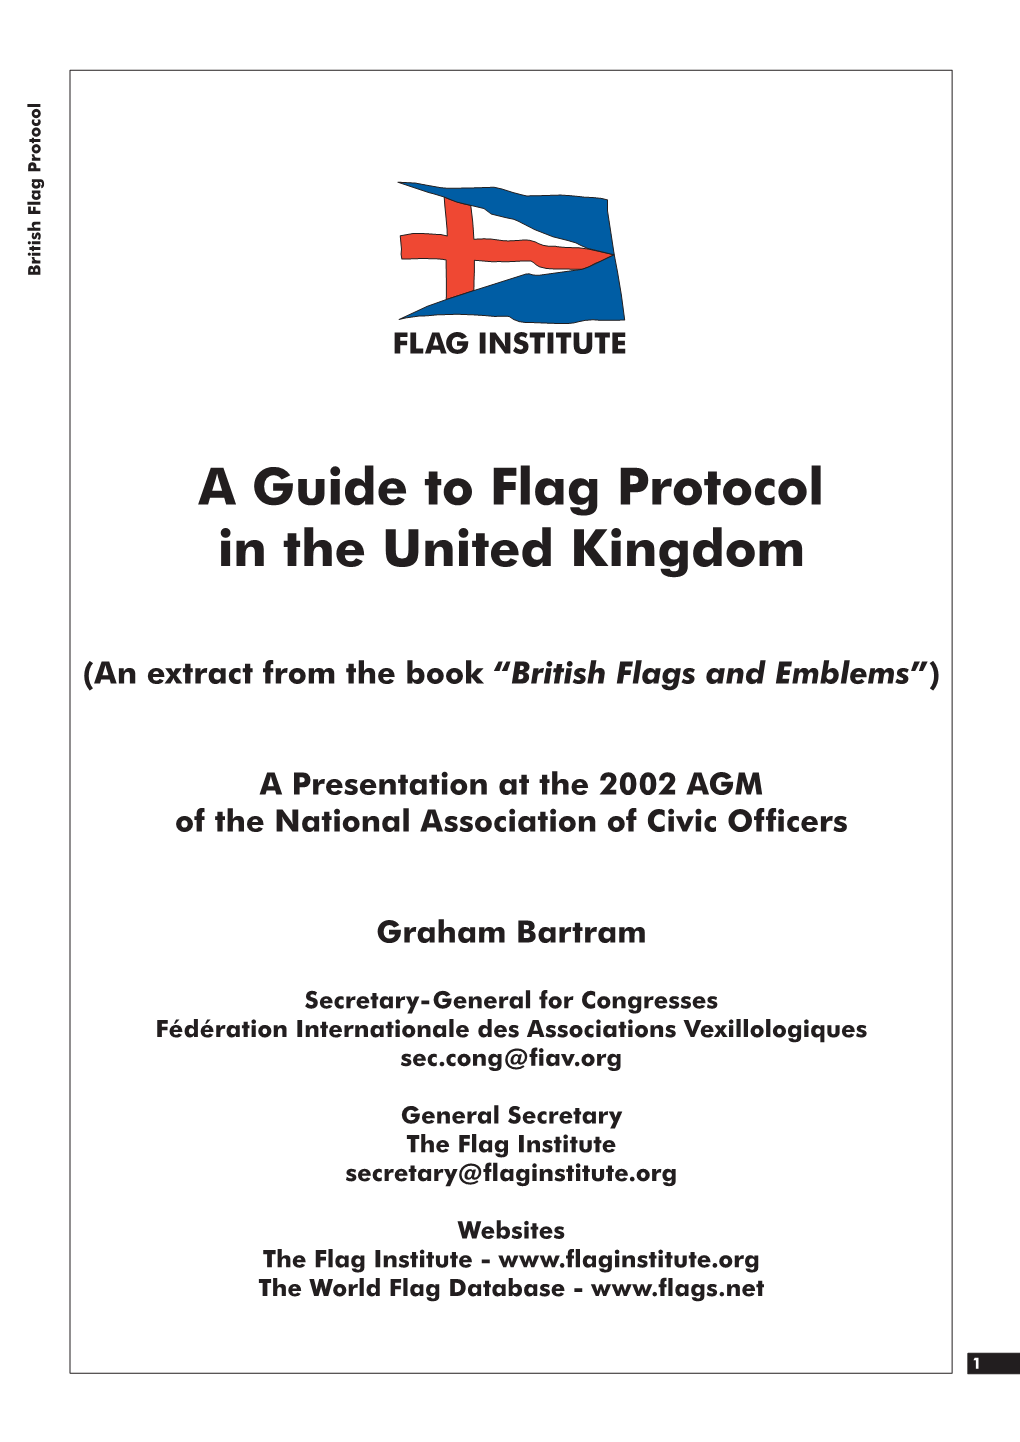 A Guide to Flag Protocol in the United Kingdom